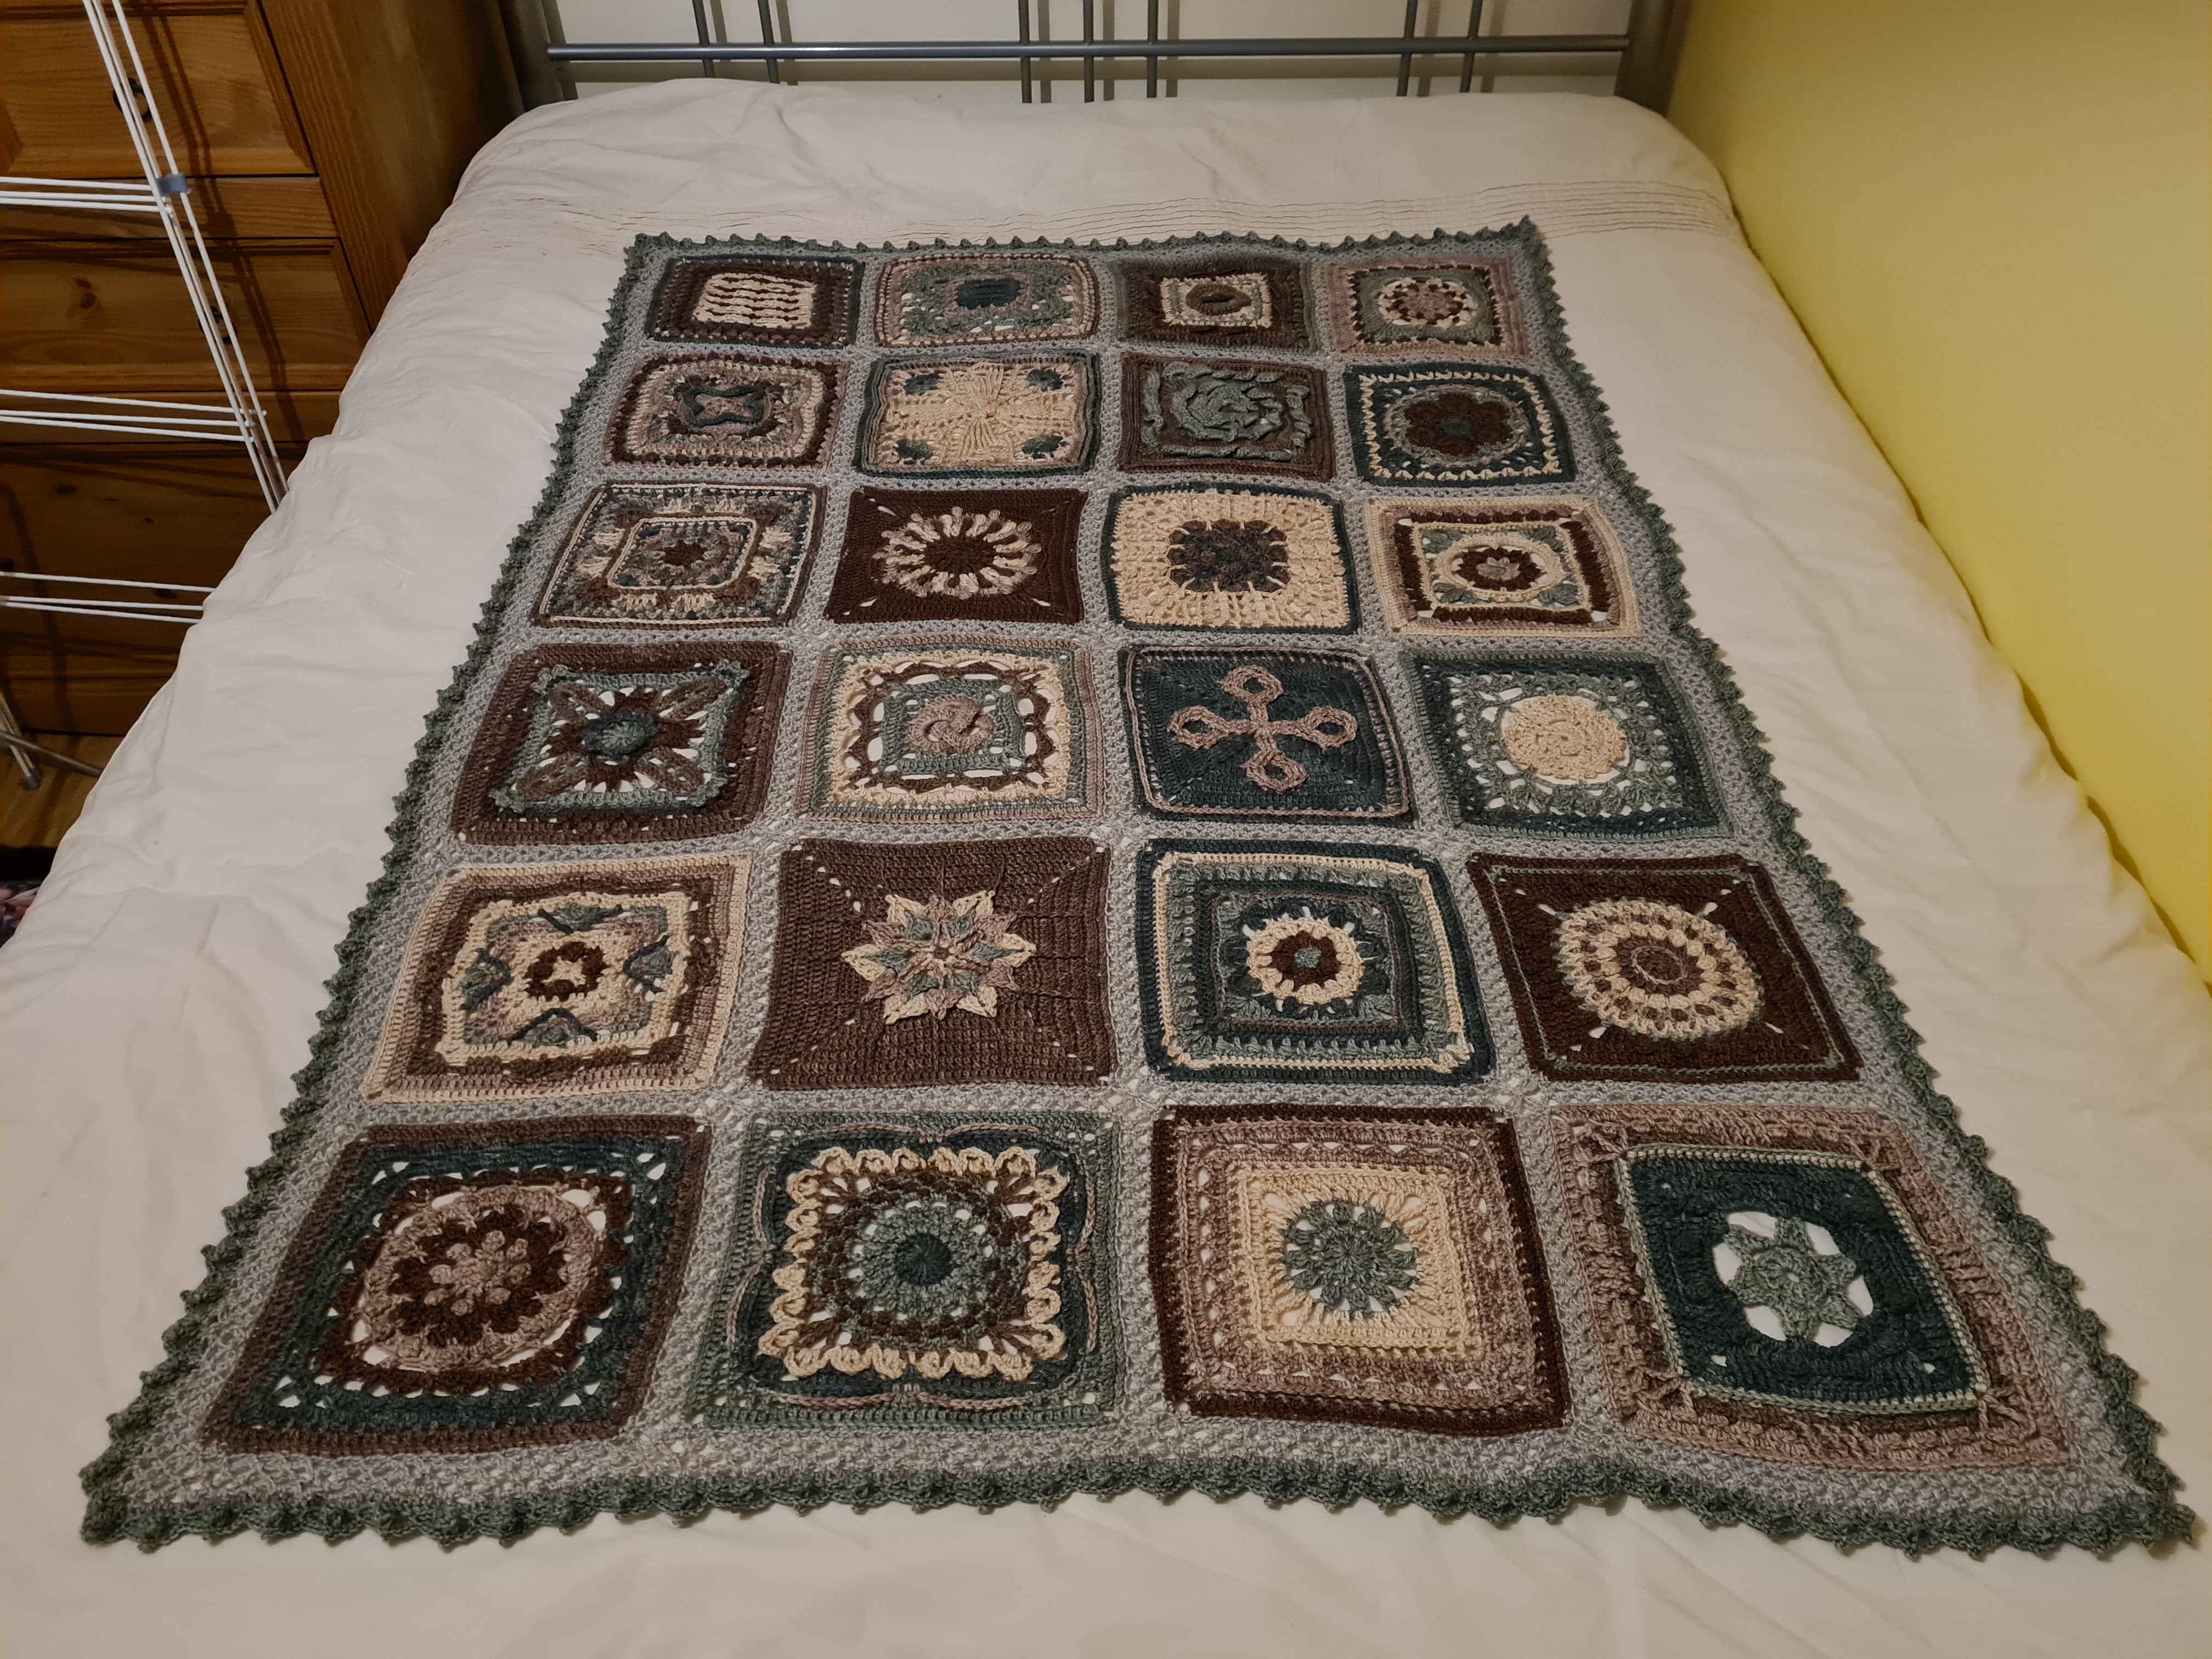 A medium sized blanket made up of intricate patterned blocks in shades of brown, blue and teal.